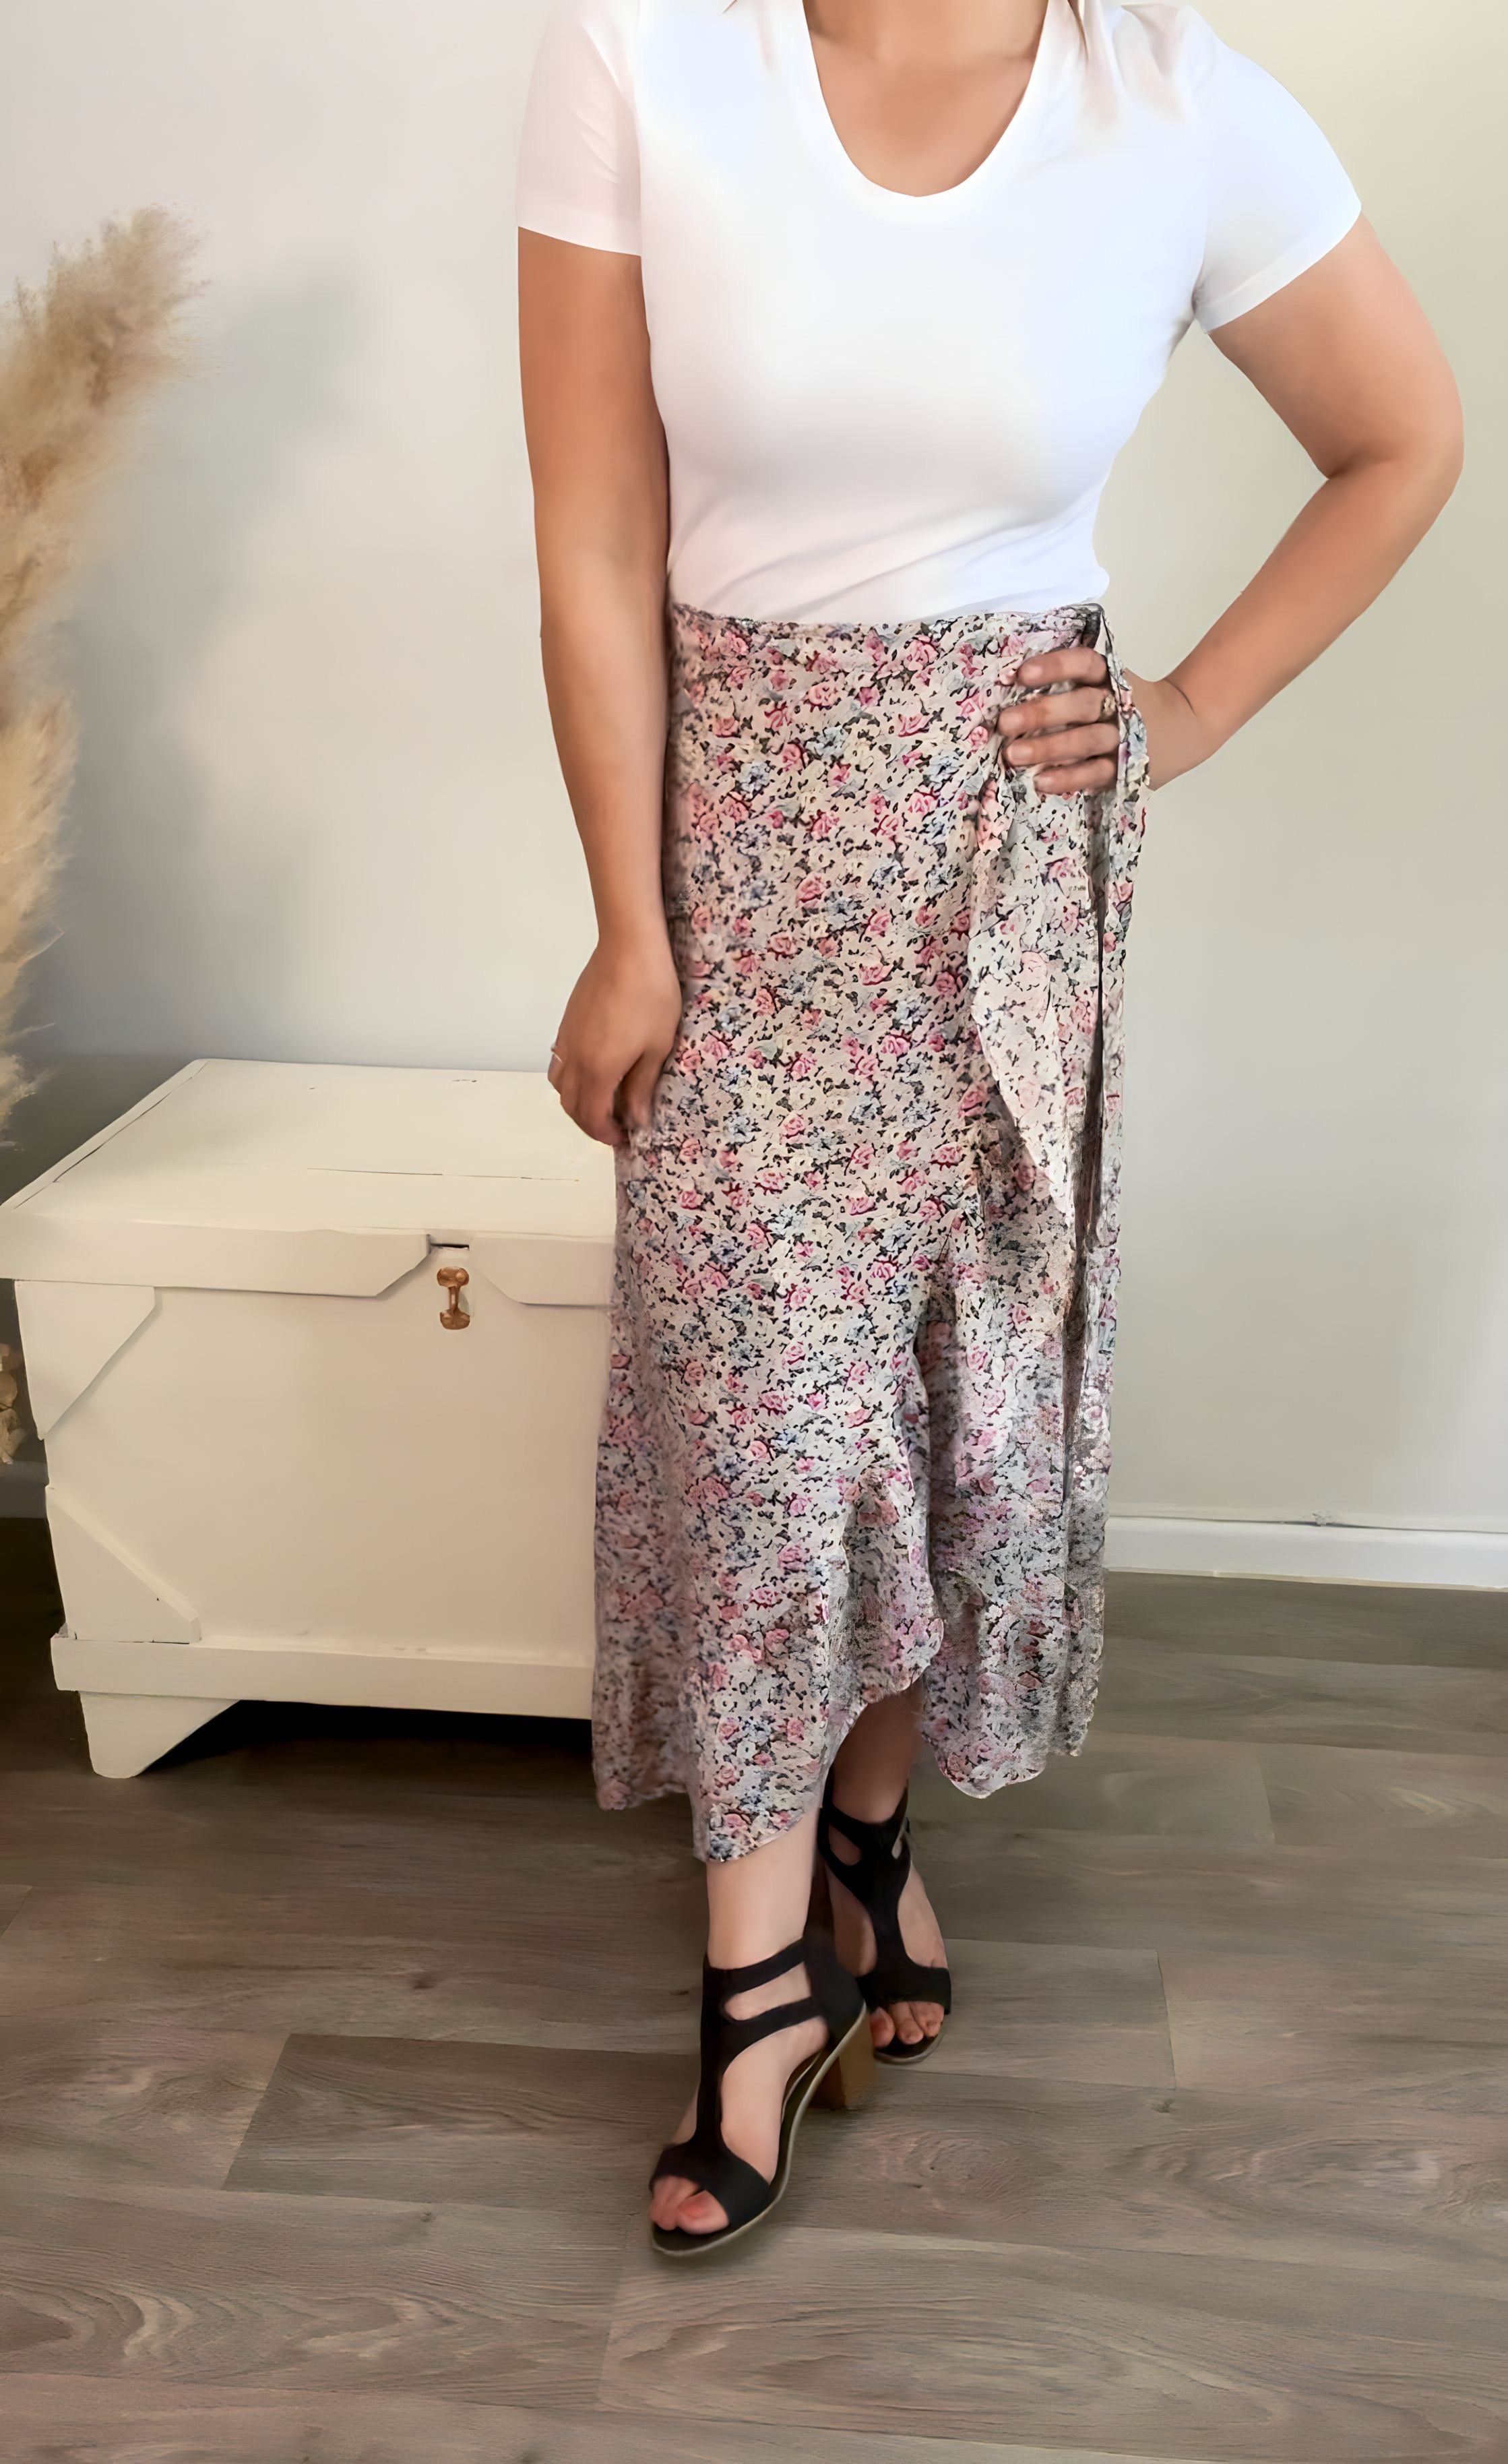 Whimsical Wildflowers Wrap skirt in Blush